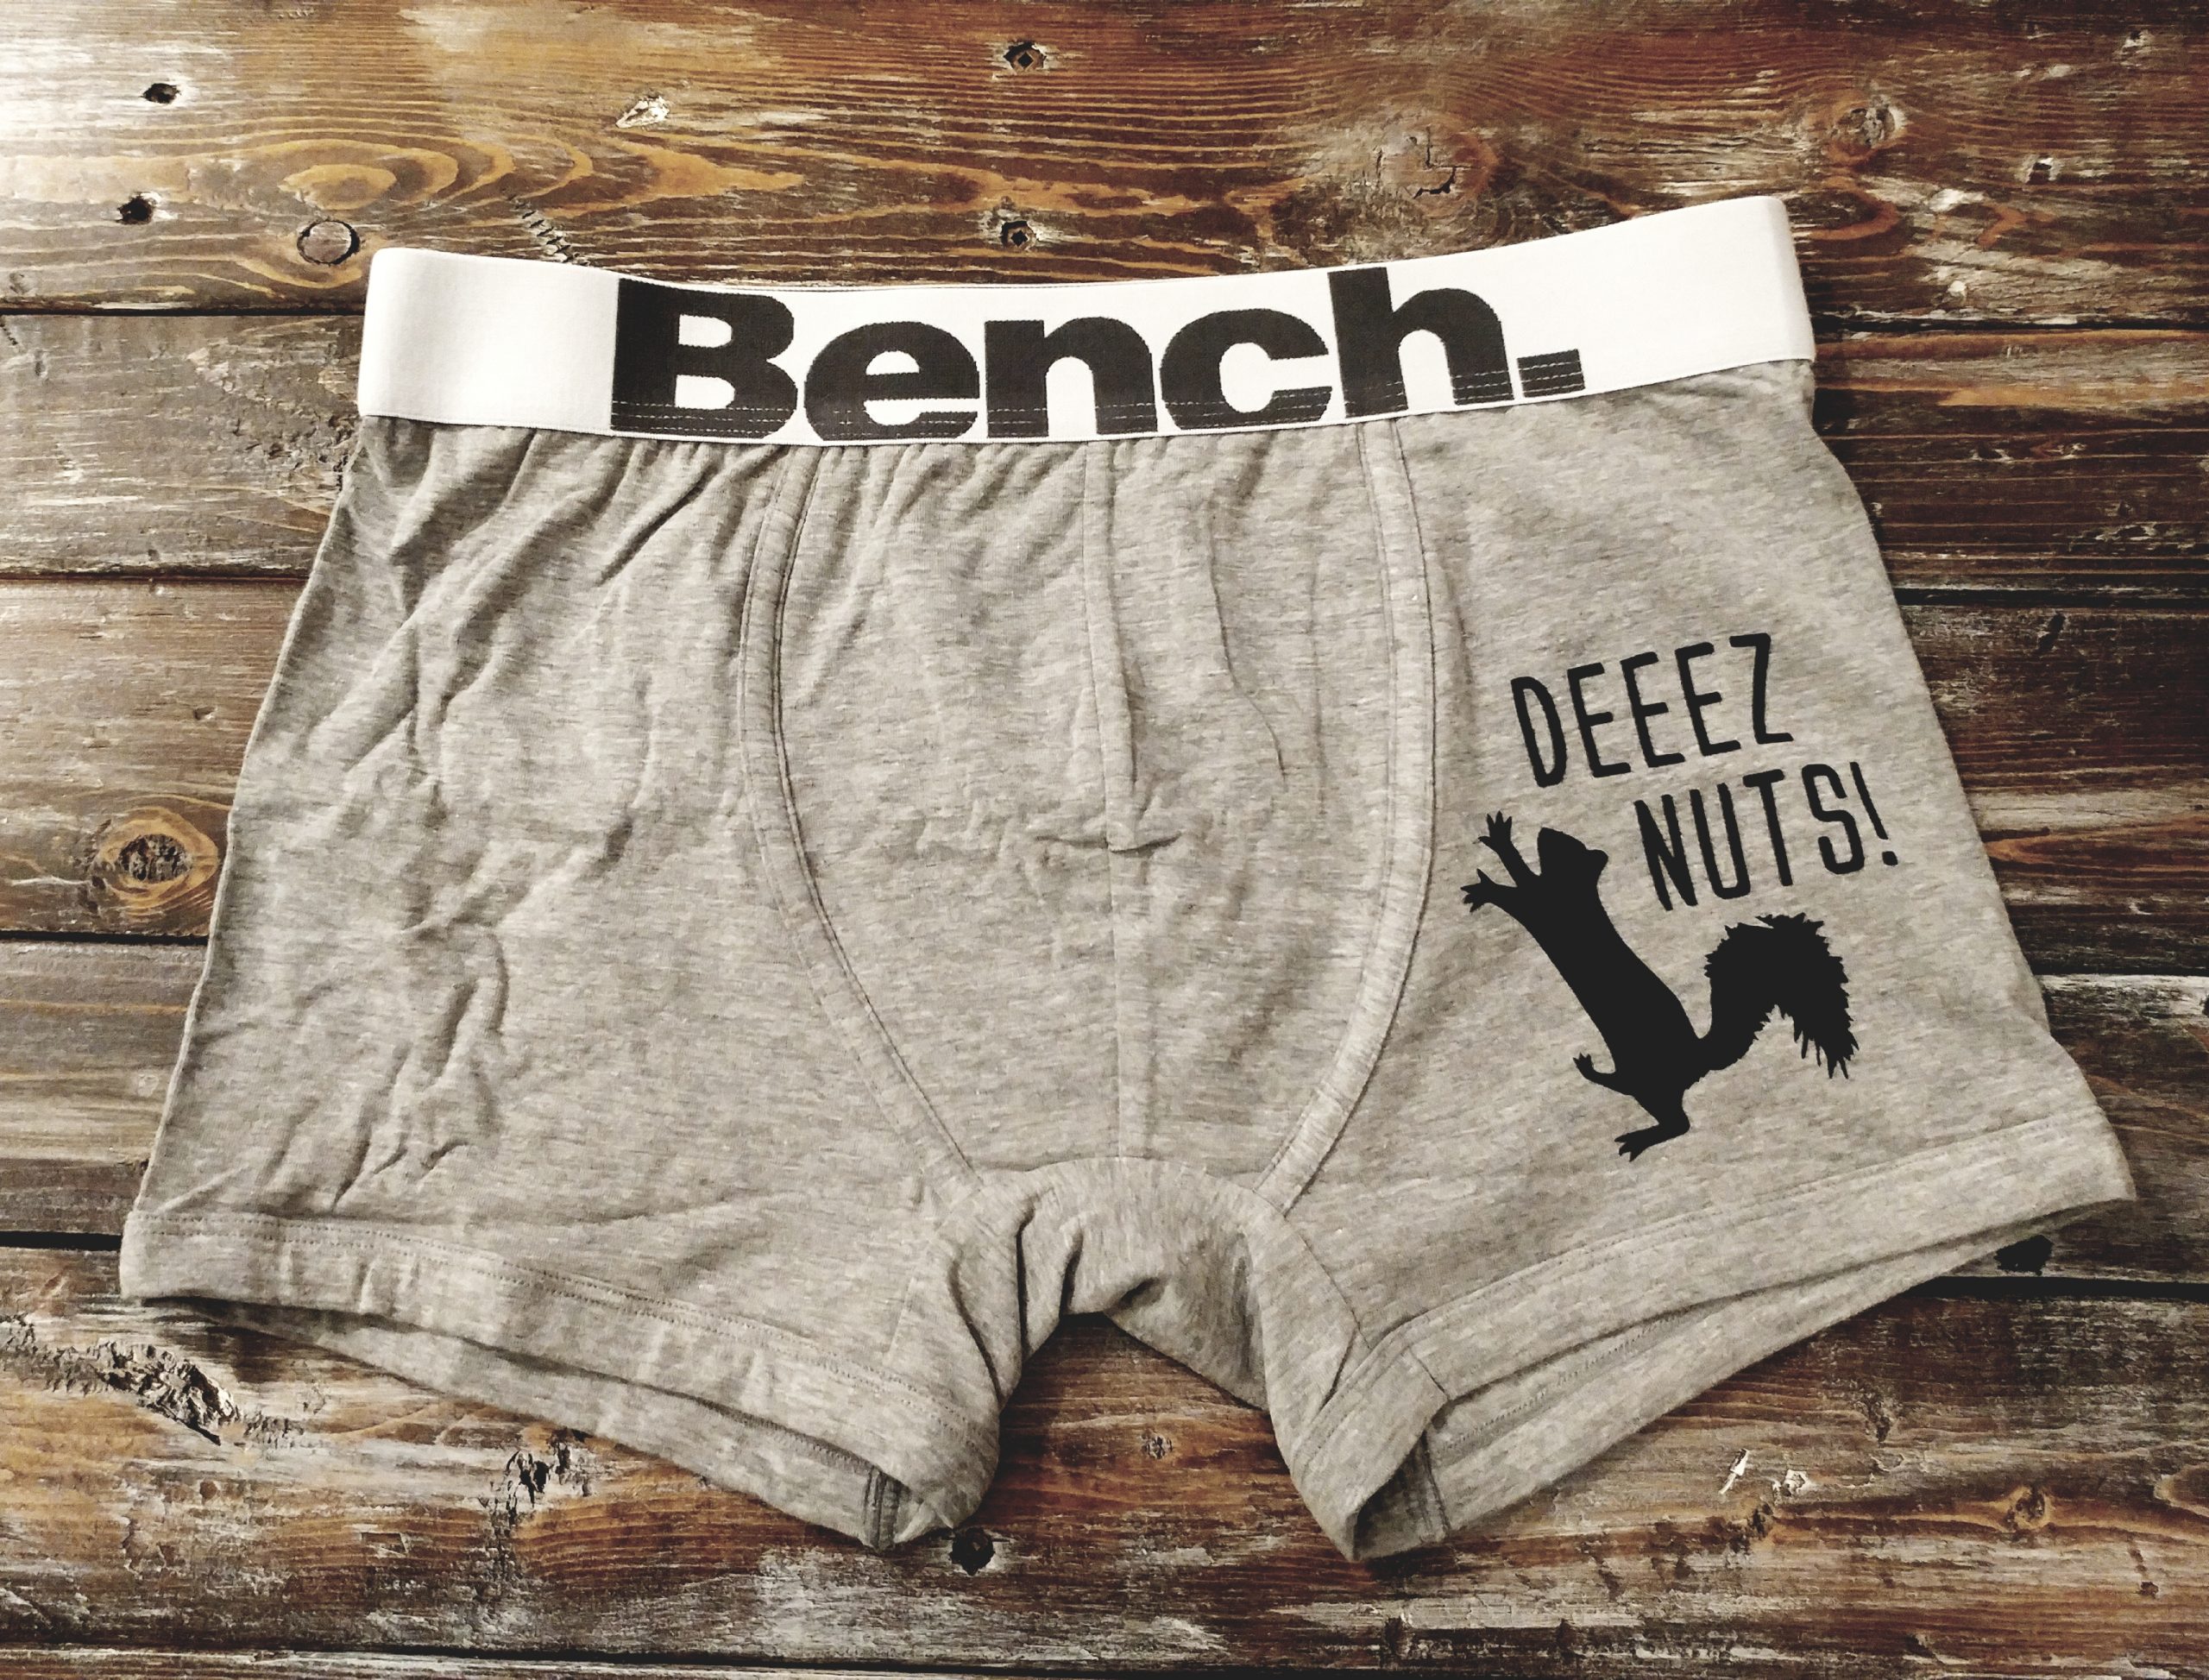 Deez Nuts with Squirrel - Men's Naughty Boxer Briefs – Happy Organized Home